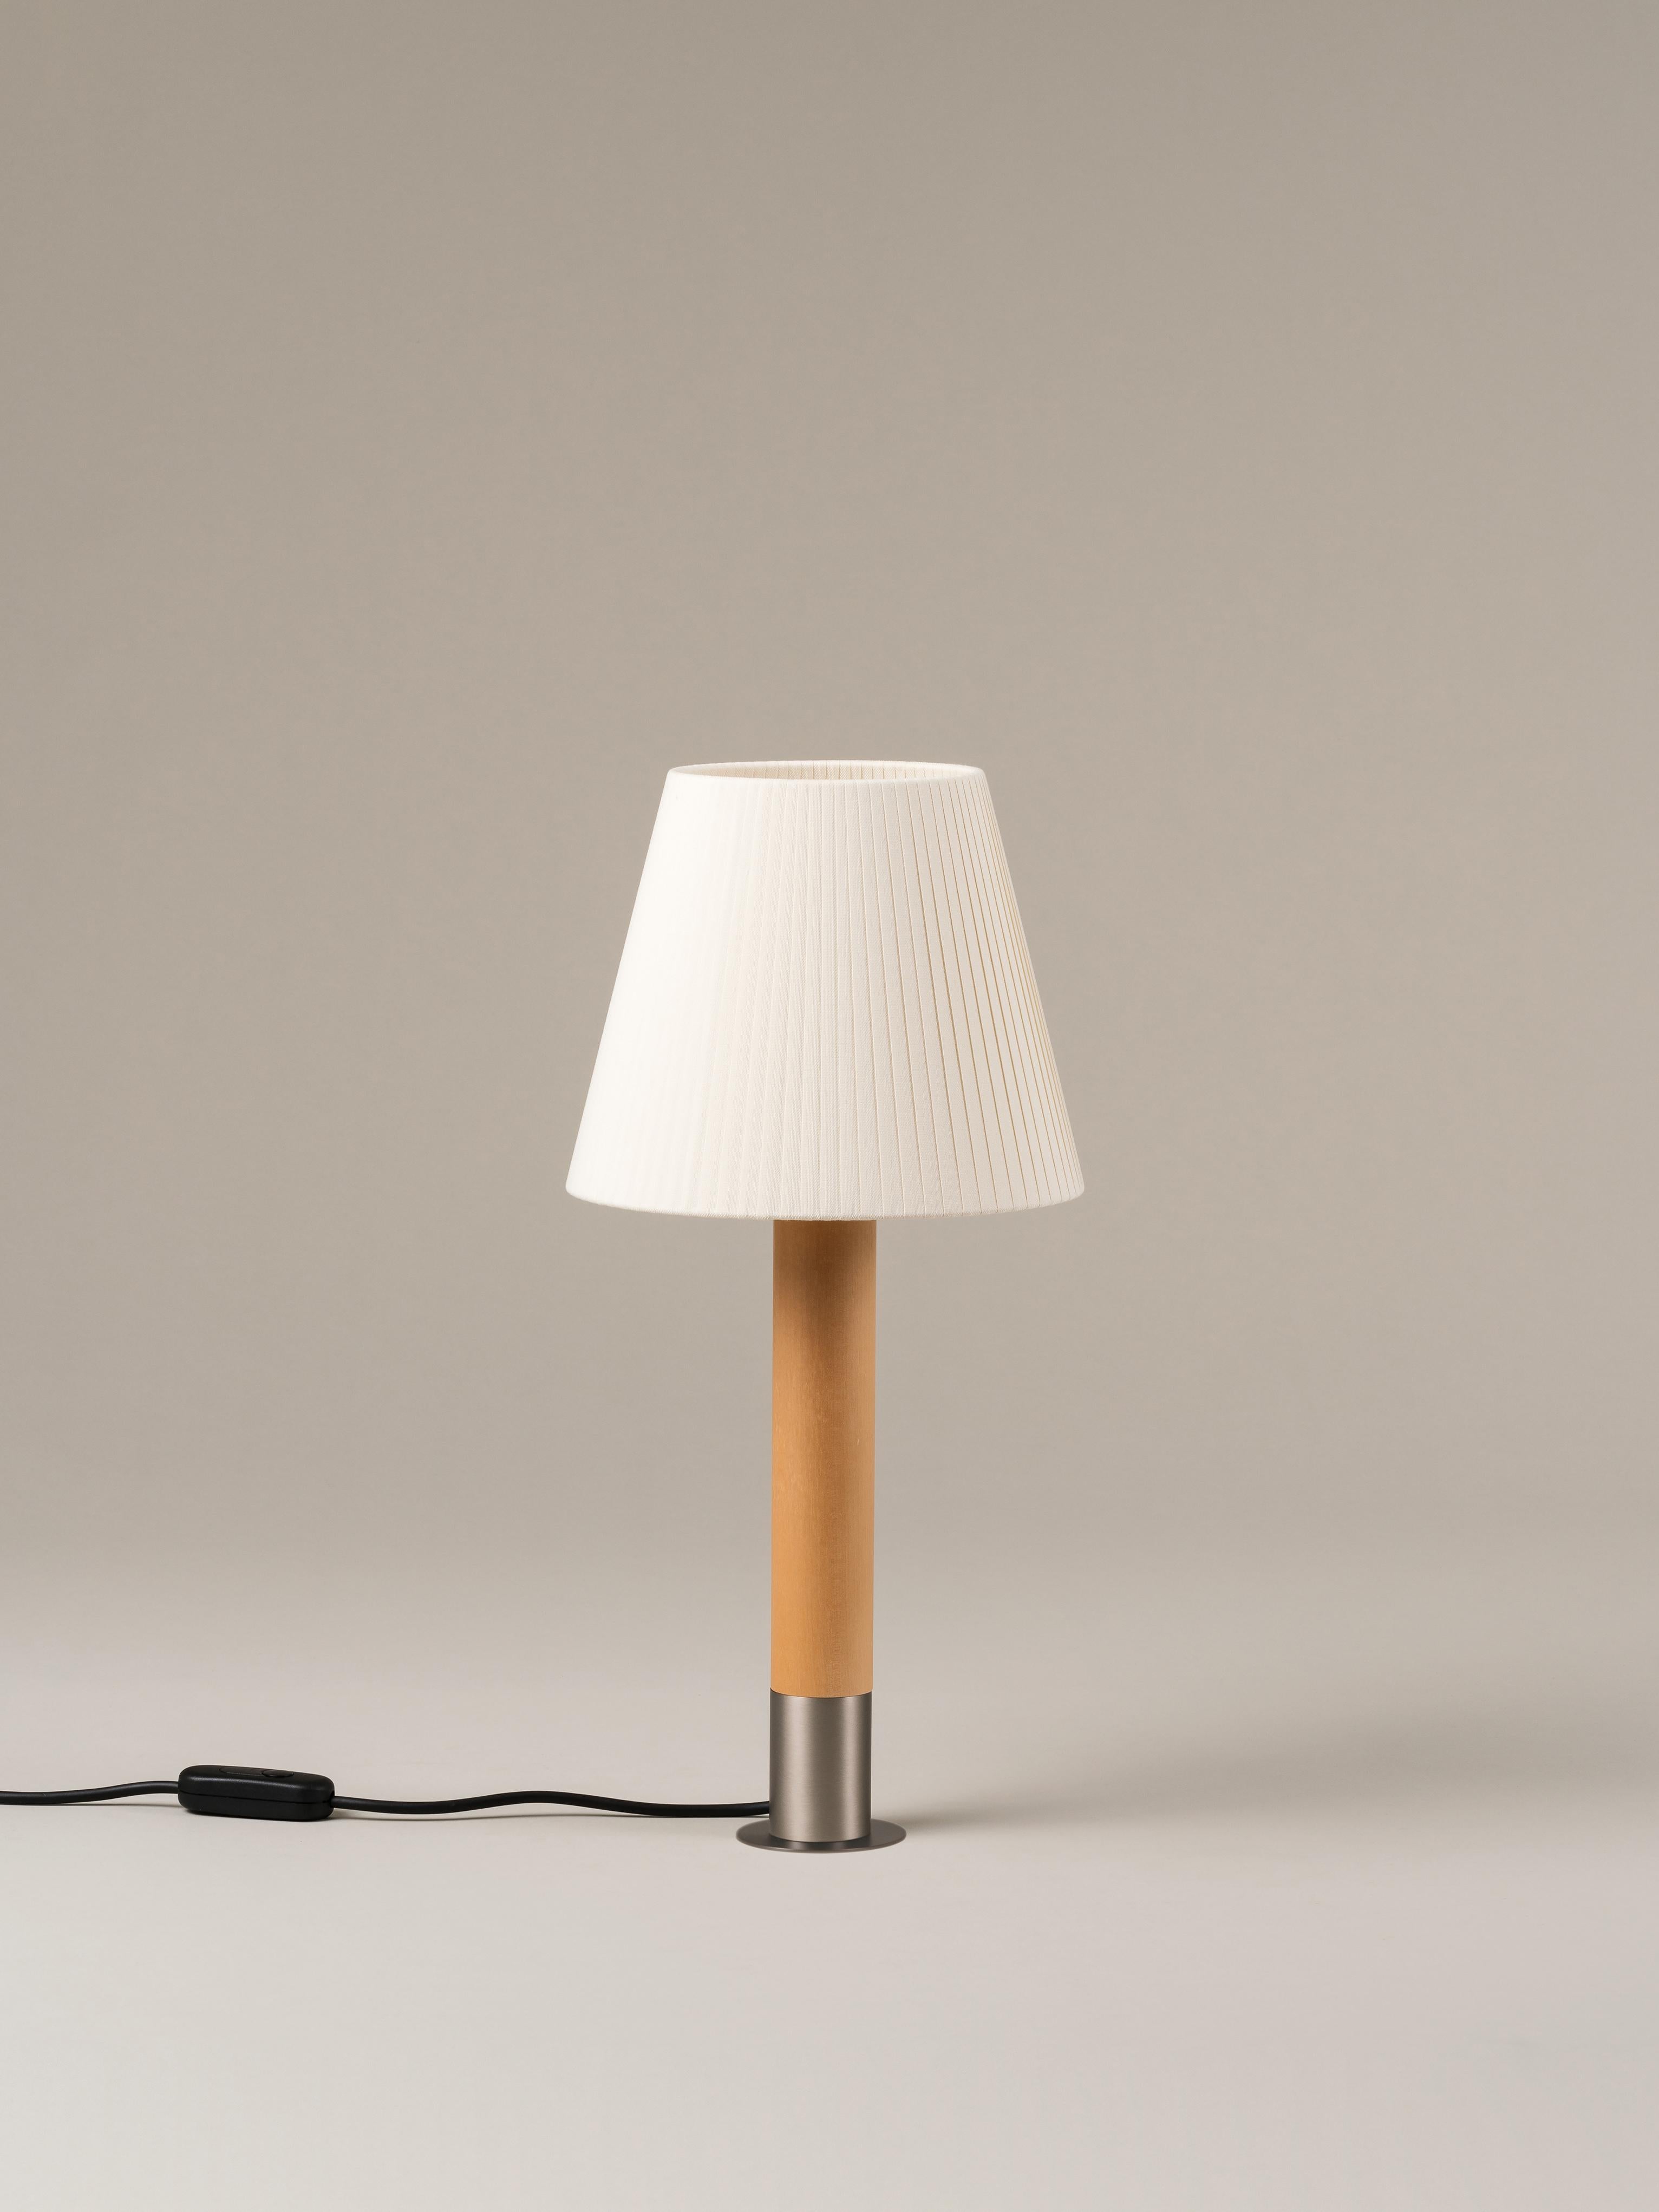 Modern Nickel and Natural Básica M1 Table Lamp by Santiago Roqueta, Santa & Cole For Sale